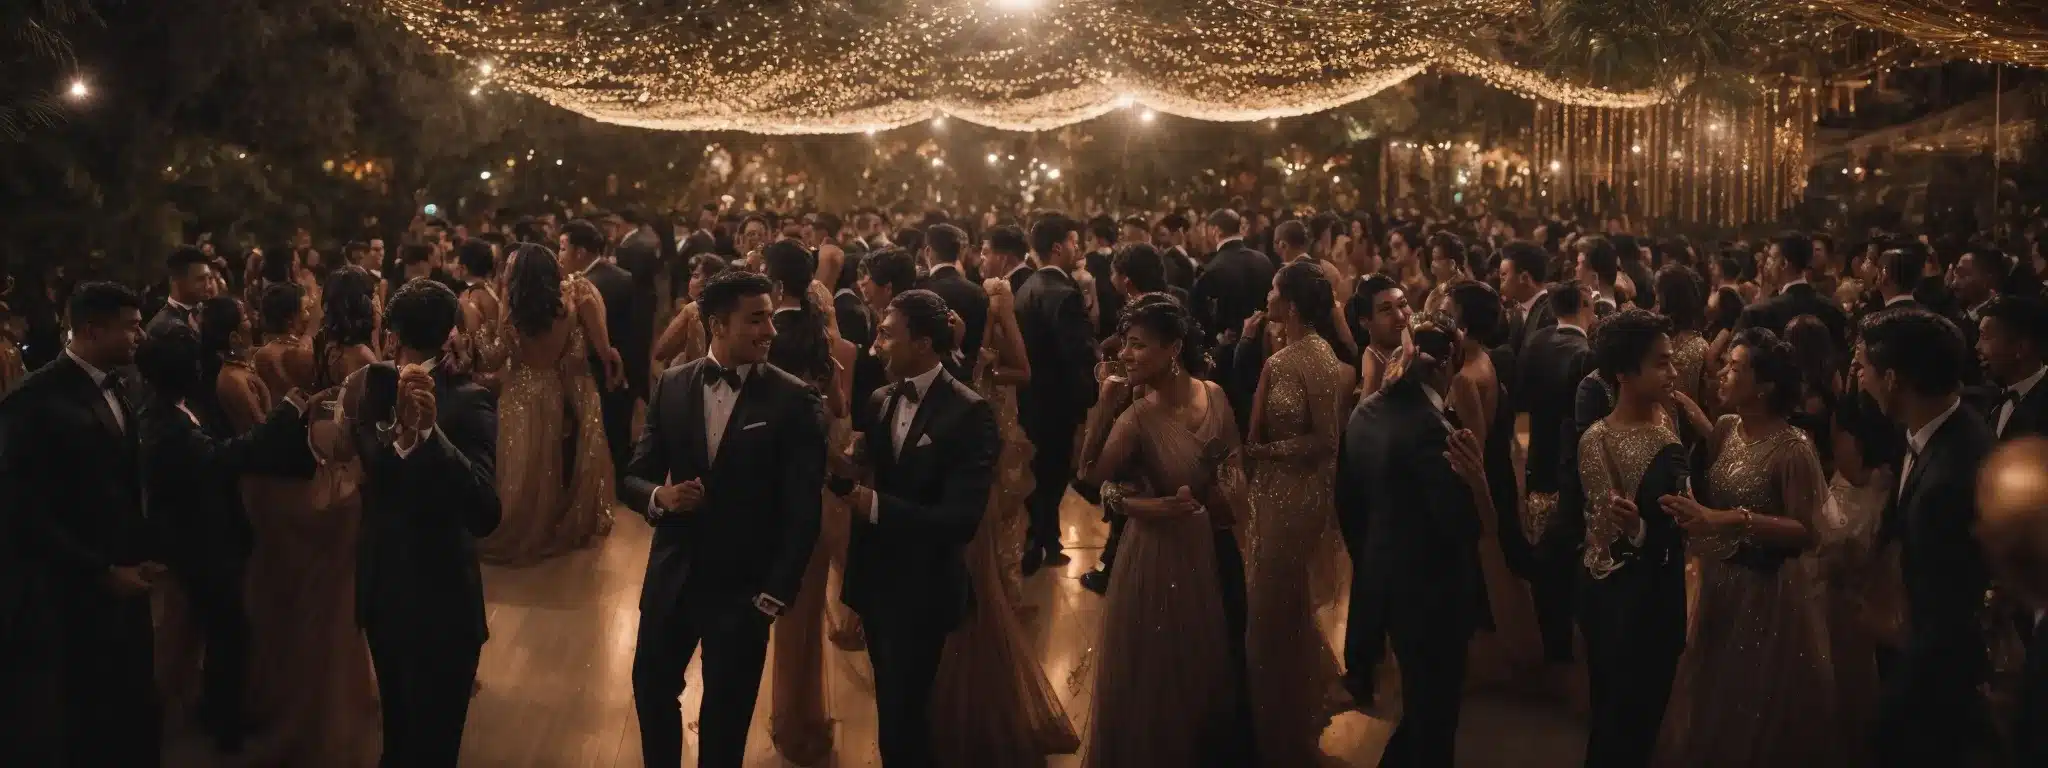 A Dance Floor Filled With People In Elegant Attire, Moving To Diverse Rhythms Under A Canopy Of Shimmering Lights.